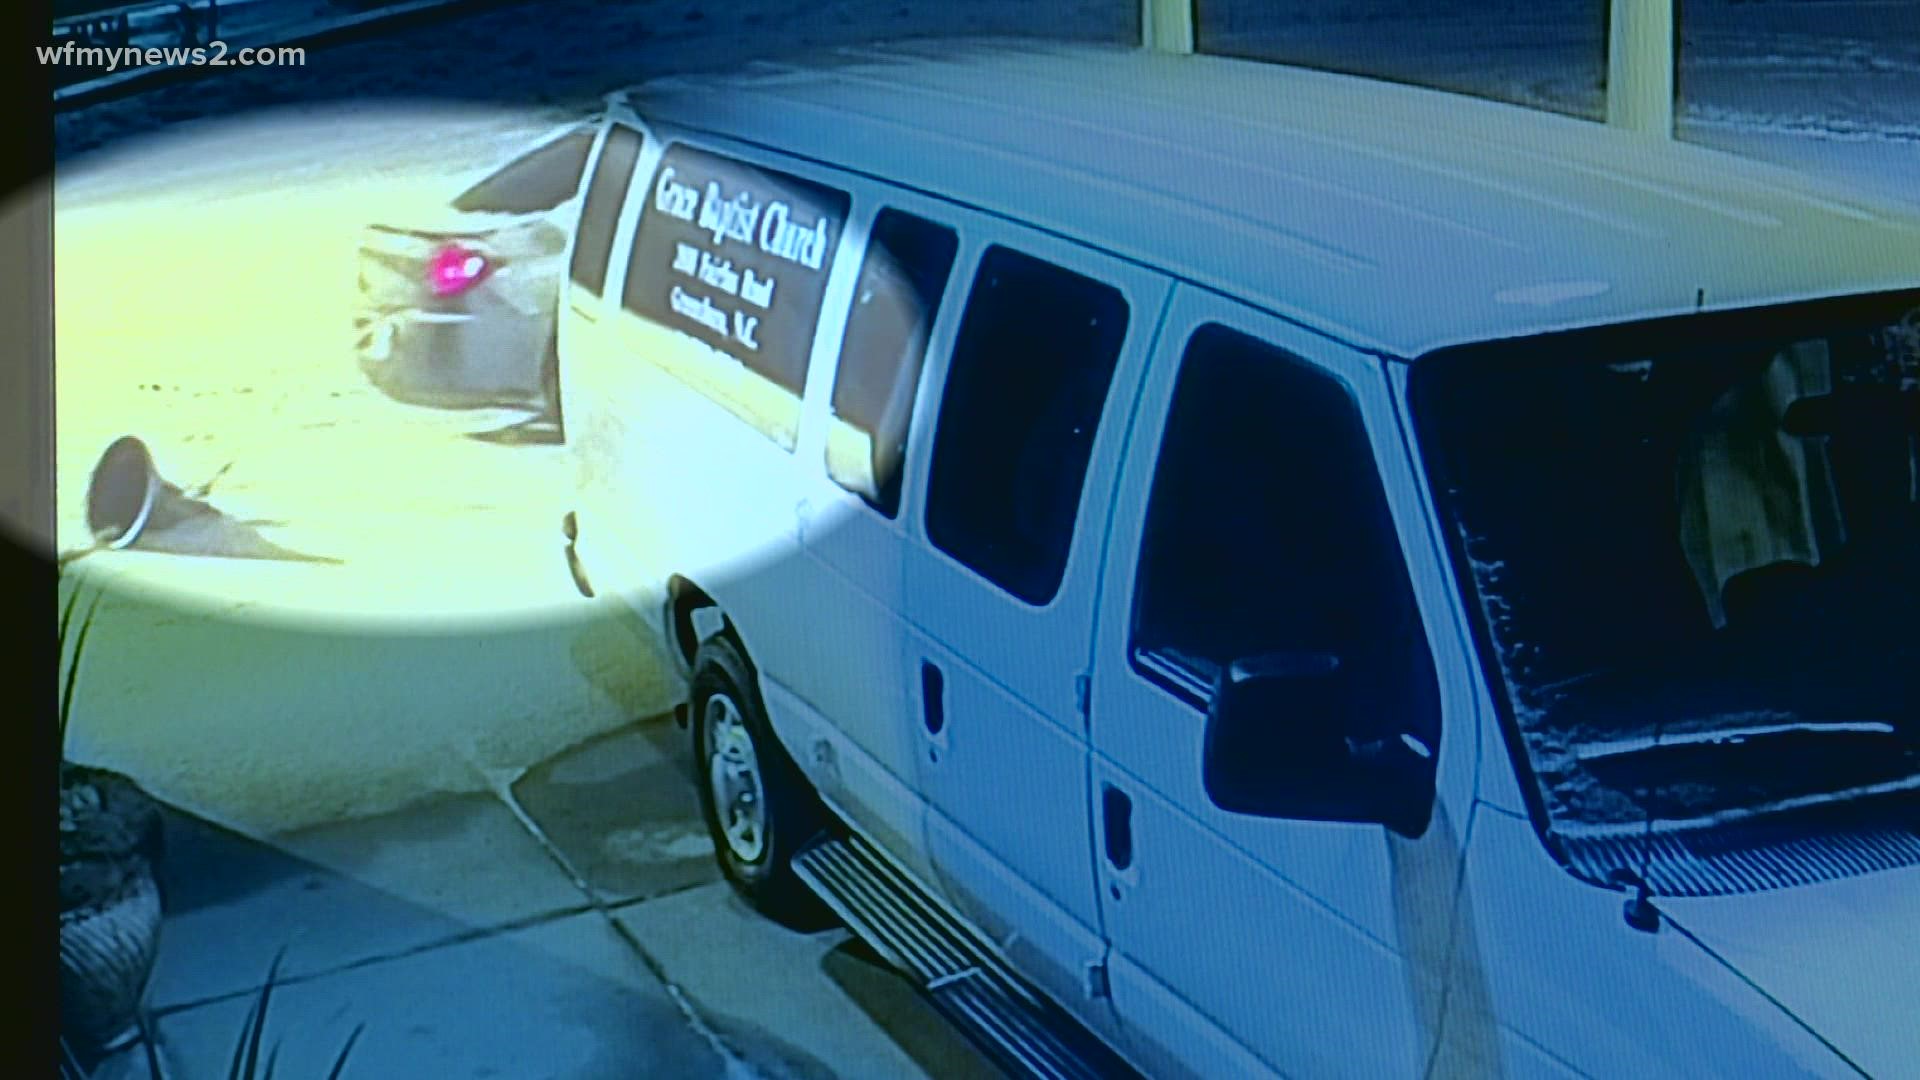 Surveillance video from Grace Baptist Church shows someone stealing the church bell, and dragging it off property behind the car.